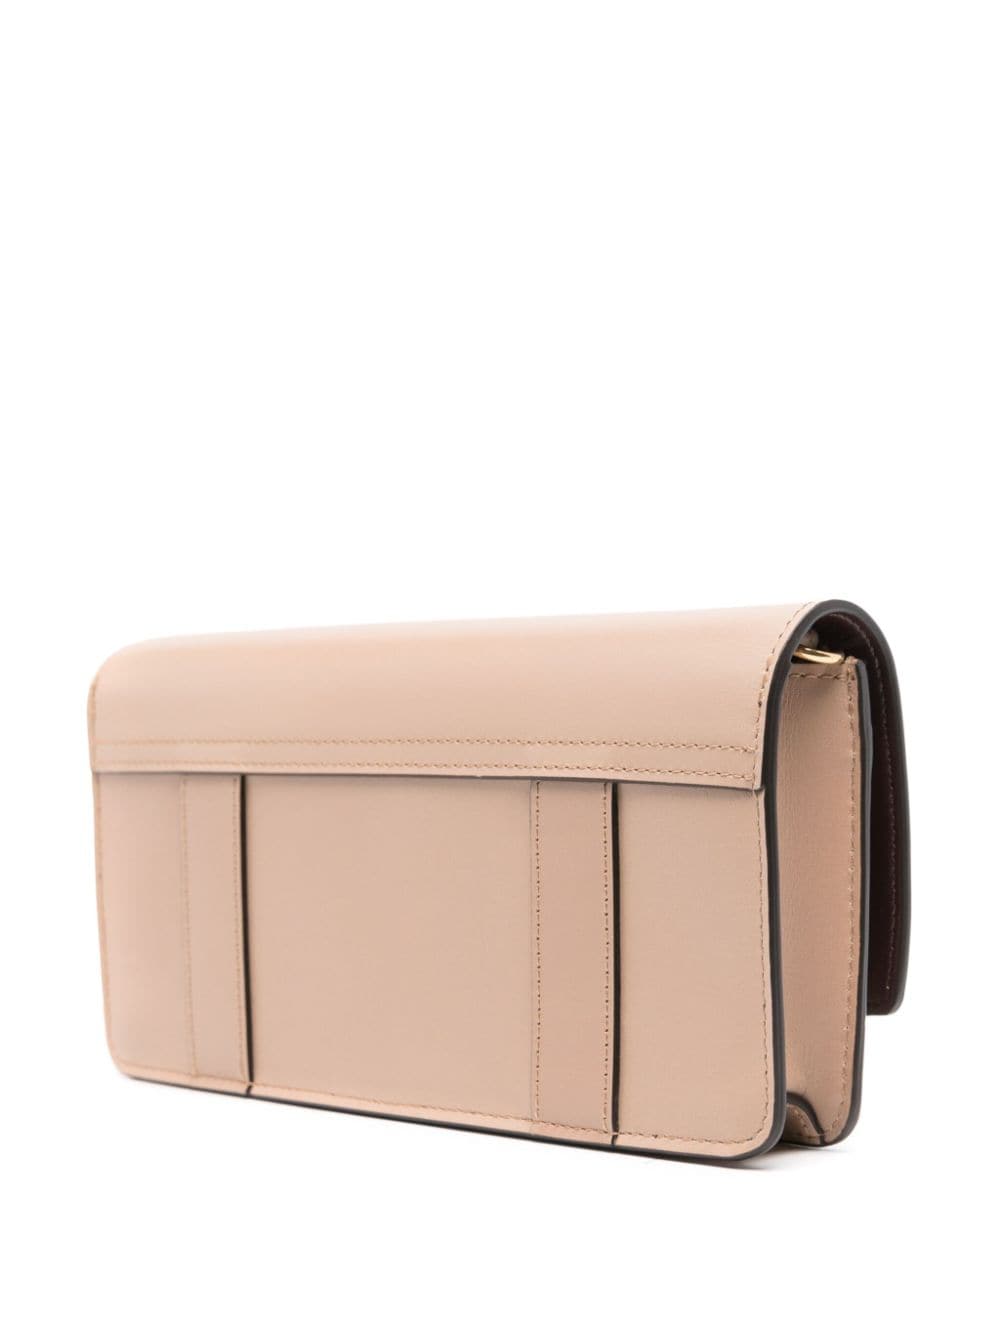 Shop Mulberry East West Bayswater Clutch In Nude